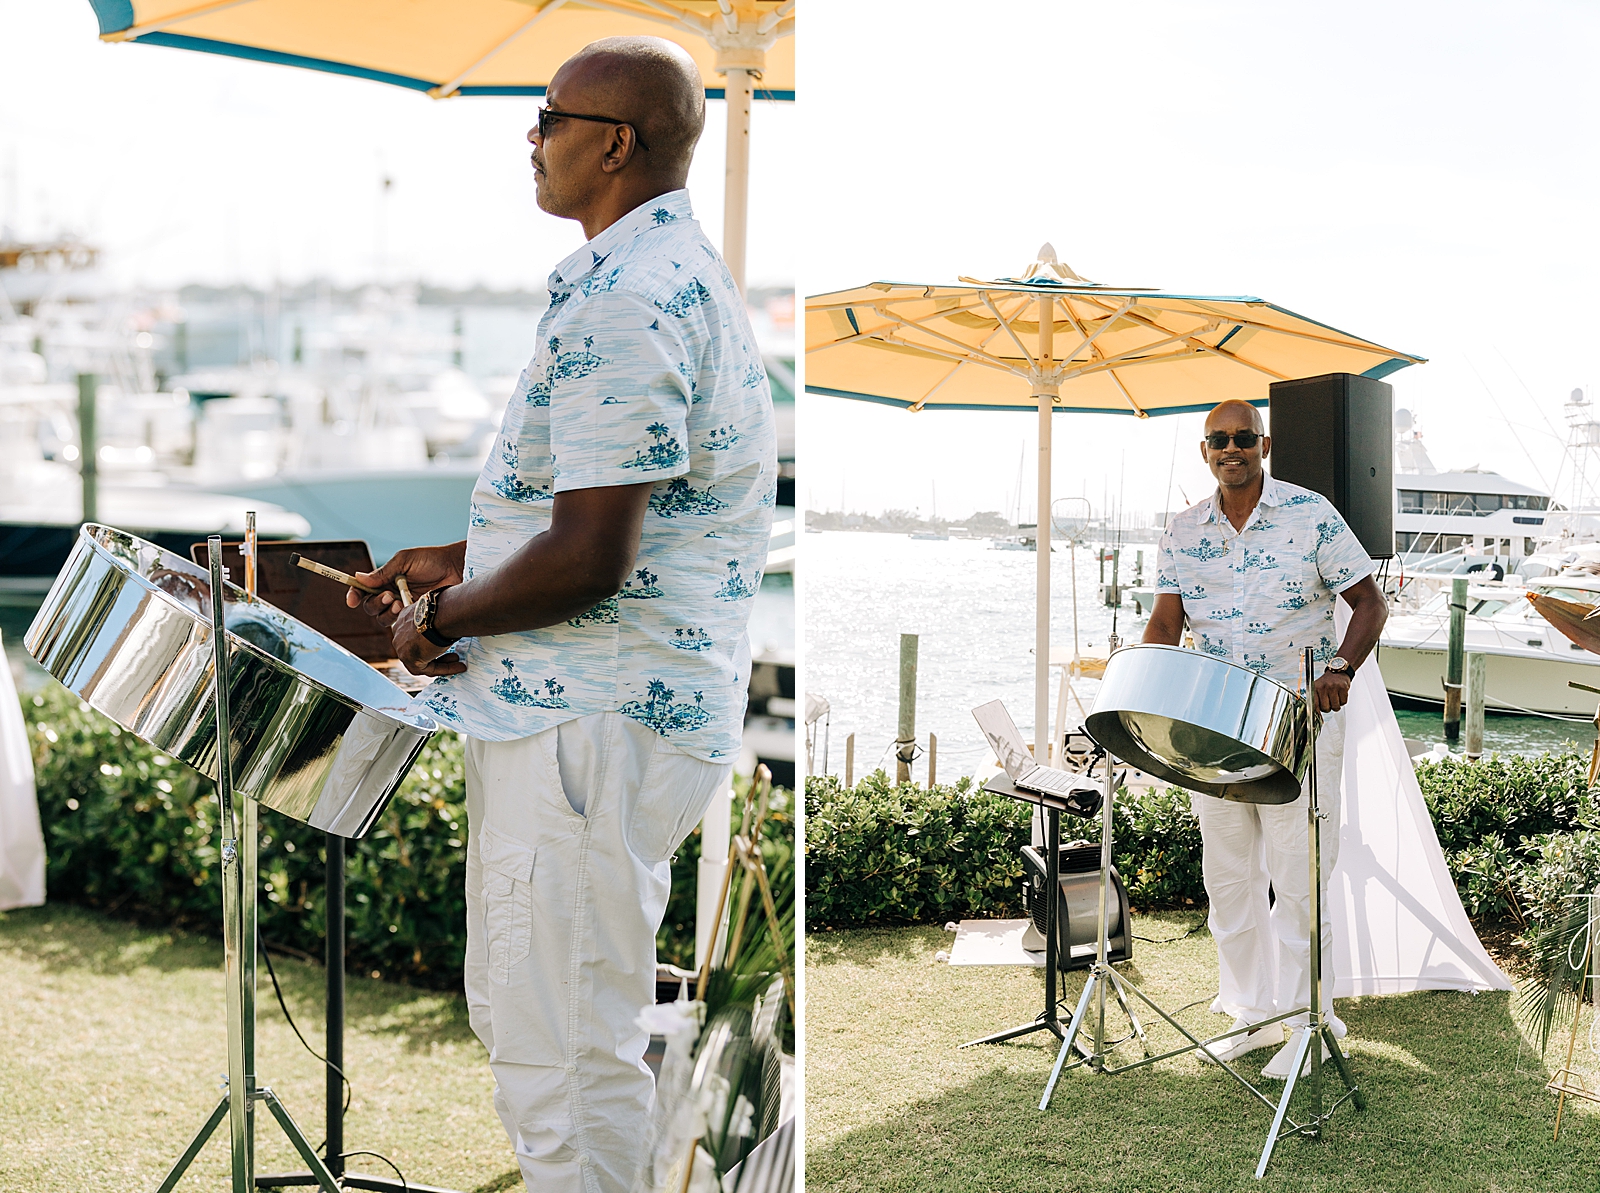 Musician playing steel drums for outdoor Ceremony